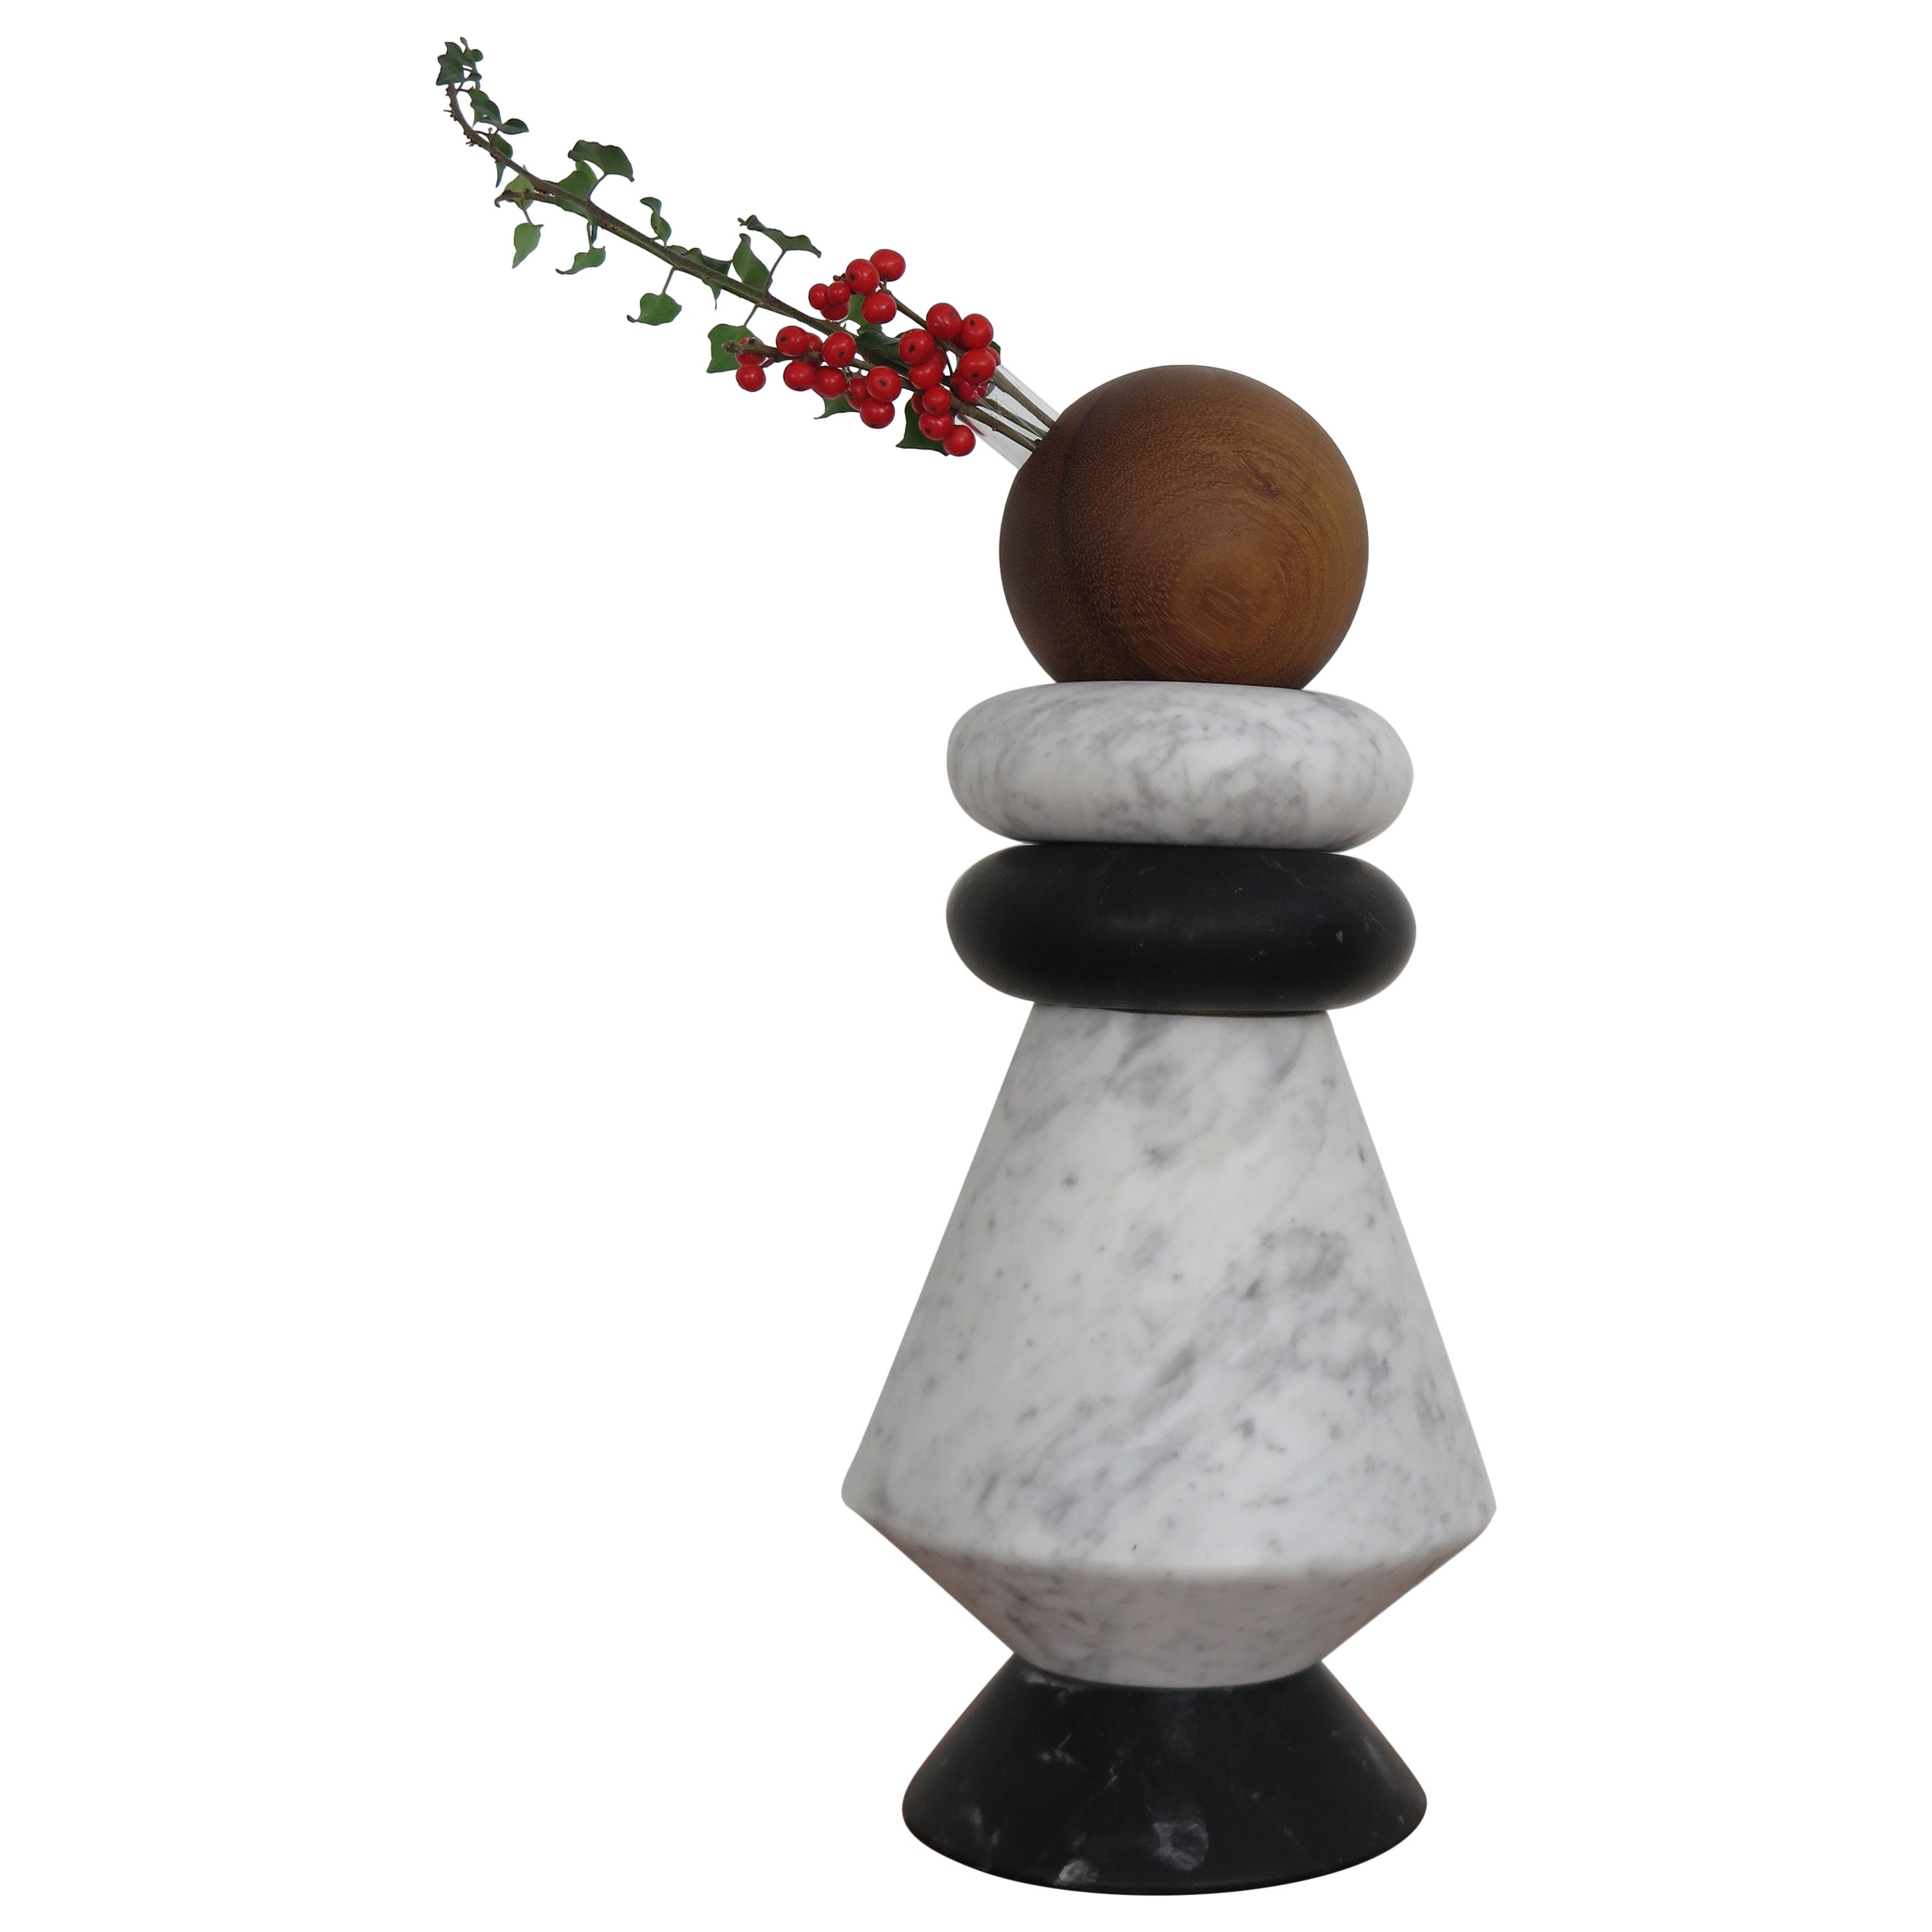 Italian Marble and Wood Contemporary Sculpture, Flower Vase "iTotem"